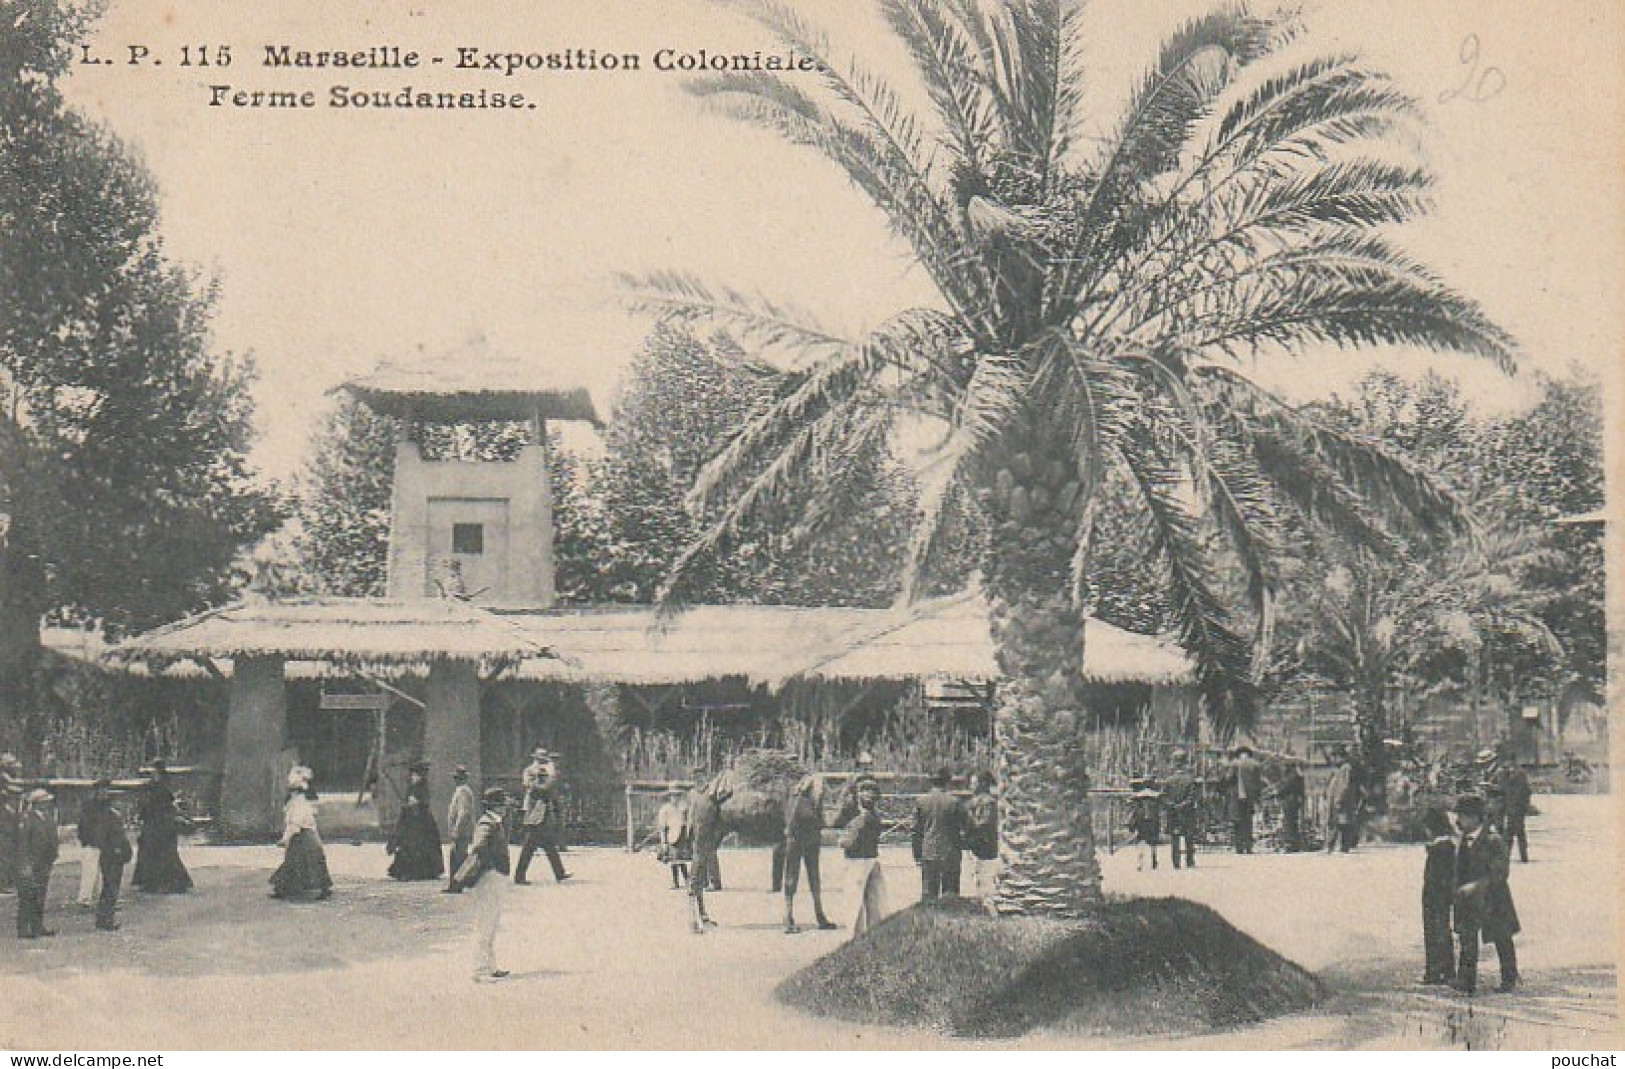 ZY 25-(13) MARSEILLE - EXPOSITION COLONIALE - FERME SOUDANAISE - ANIMATION - 2 SCANS - Expositions Coloniales 1906 - 1922